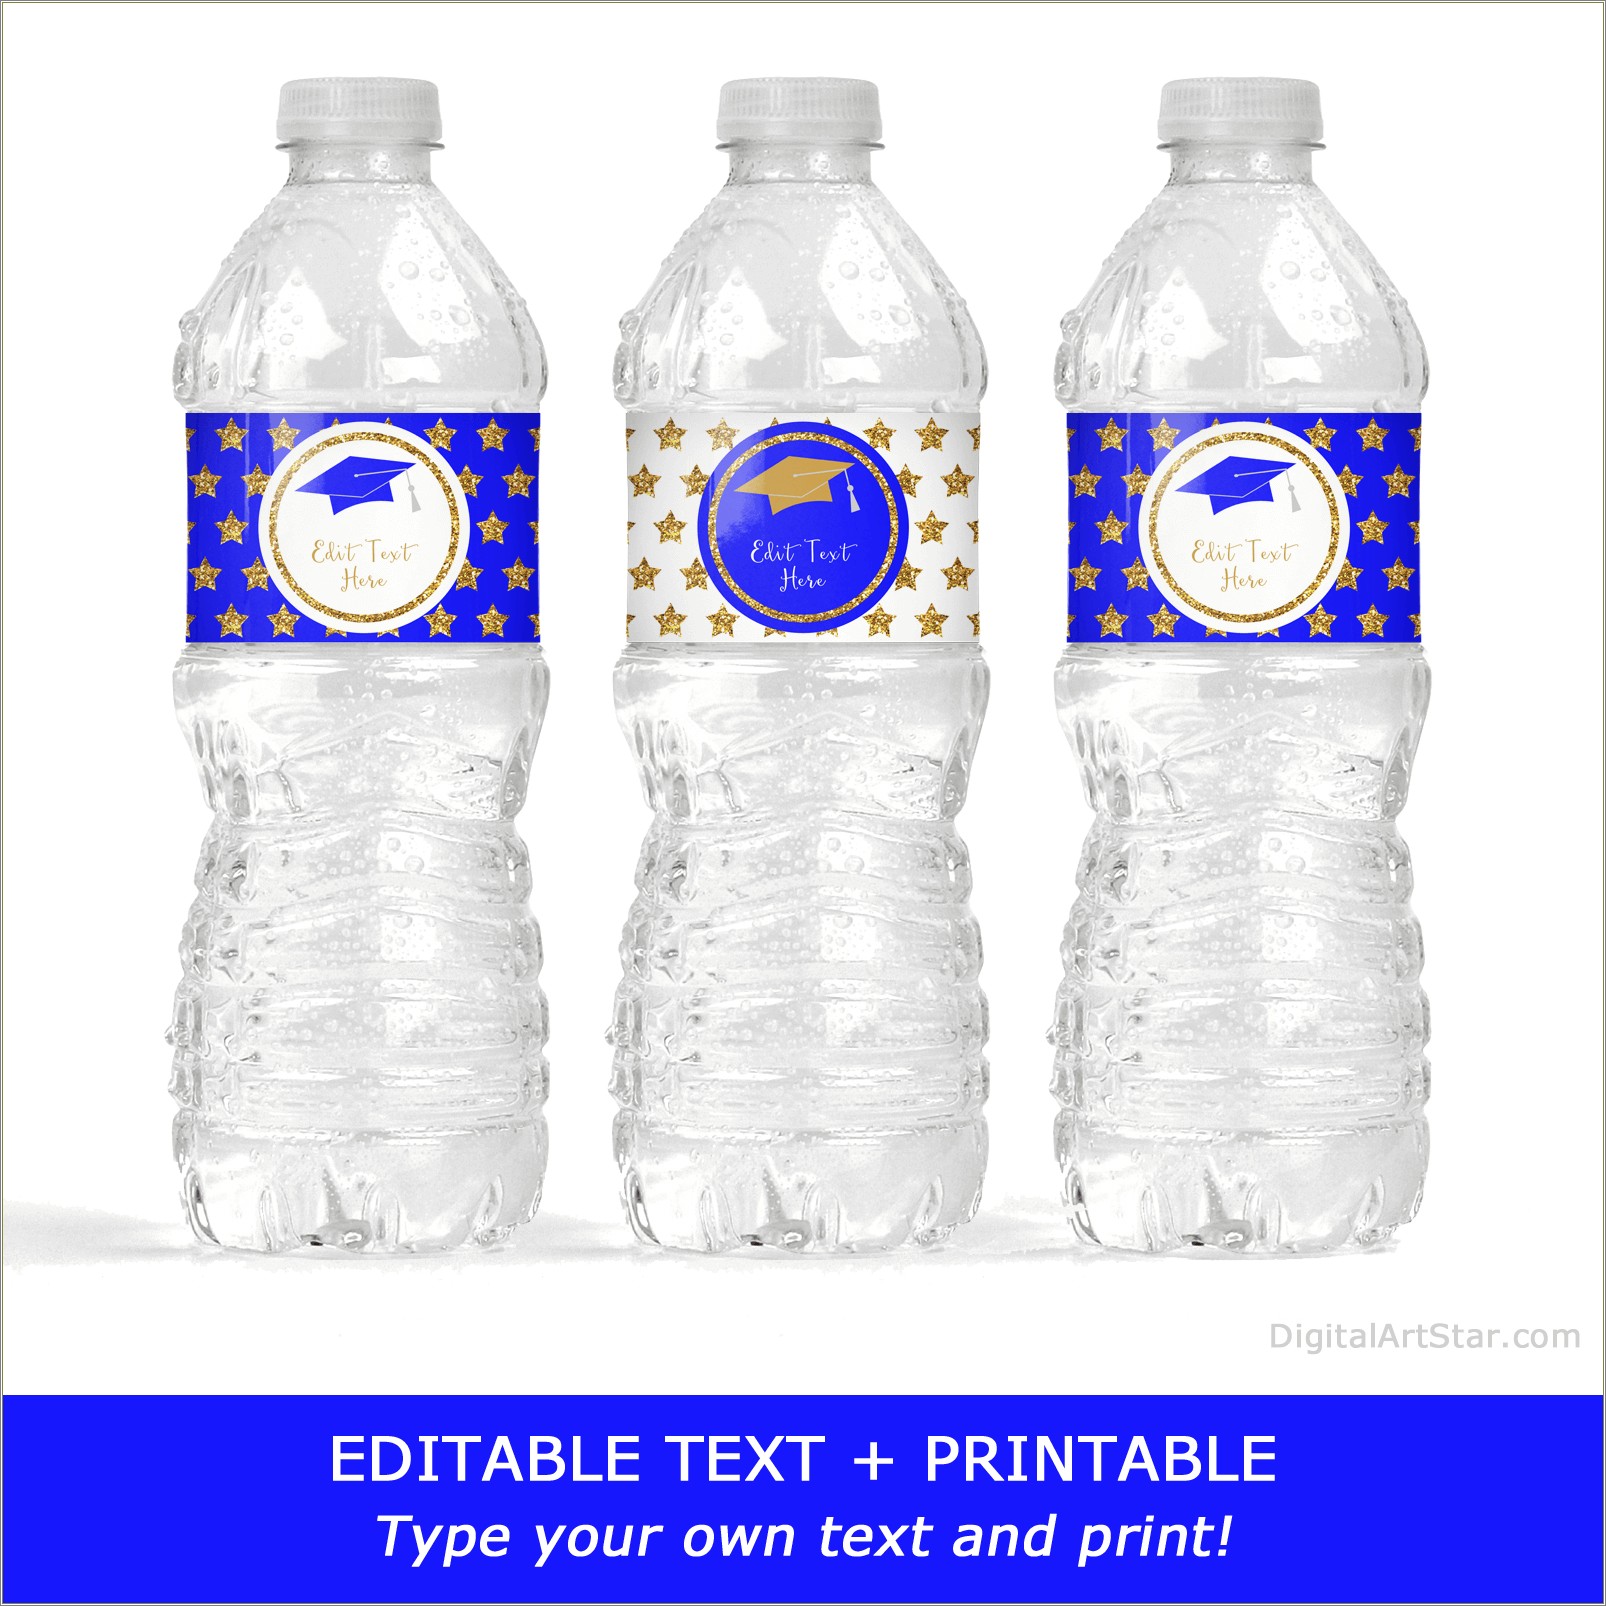 Free Printable Water Bottle Labels Template For Graduation